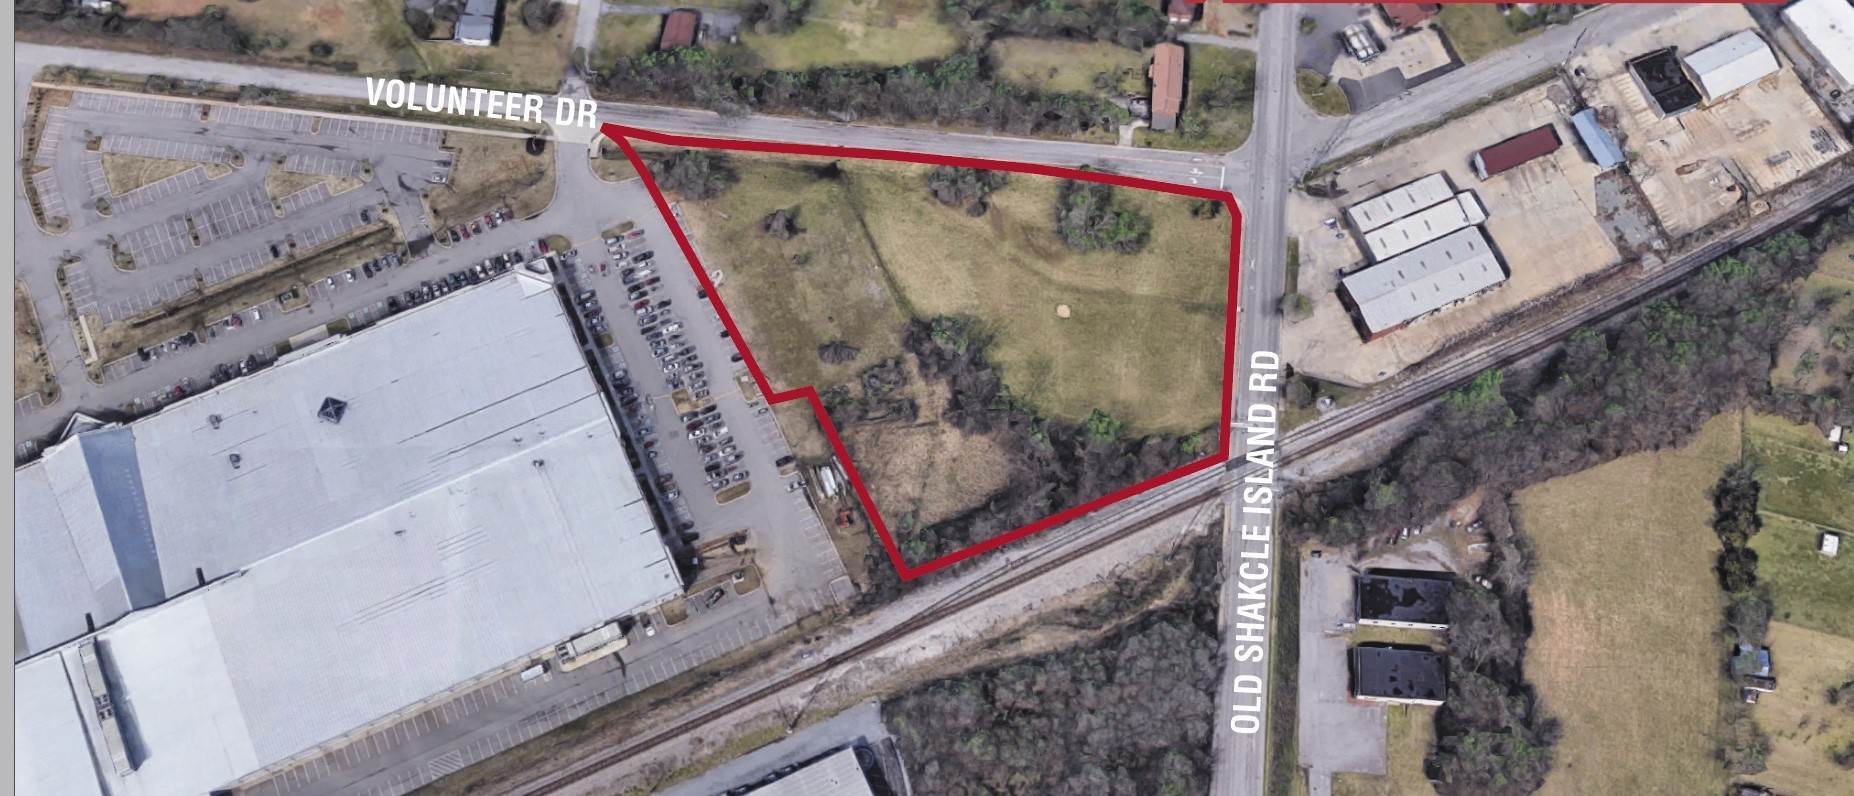 Commercial for Sale at 98 Volunteer Drive Hendersonville, Tennessee 37075 United States